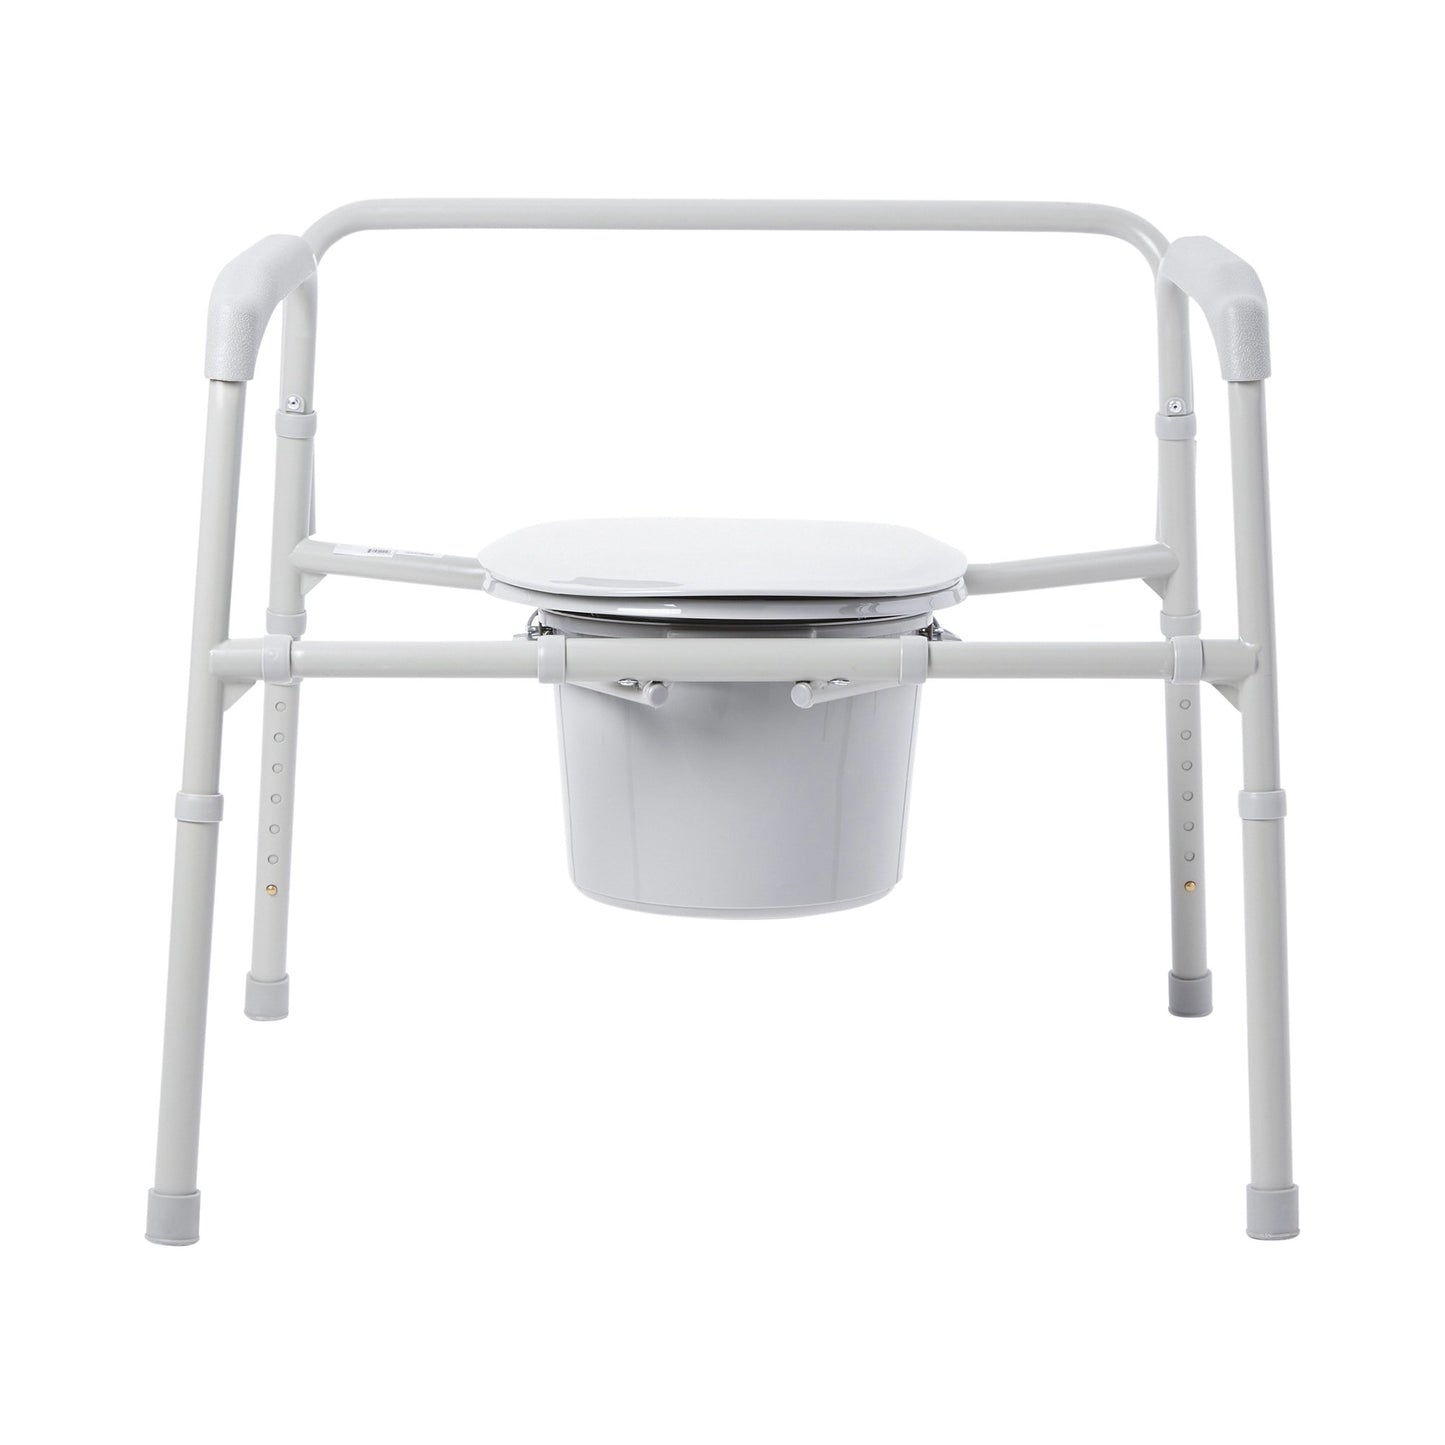 McKesson Fixed Arm Steel Folding Commode Chair, 15.5 – 22 Inch